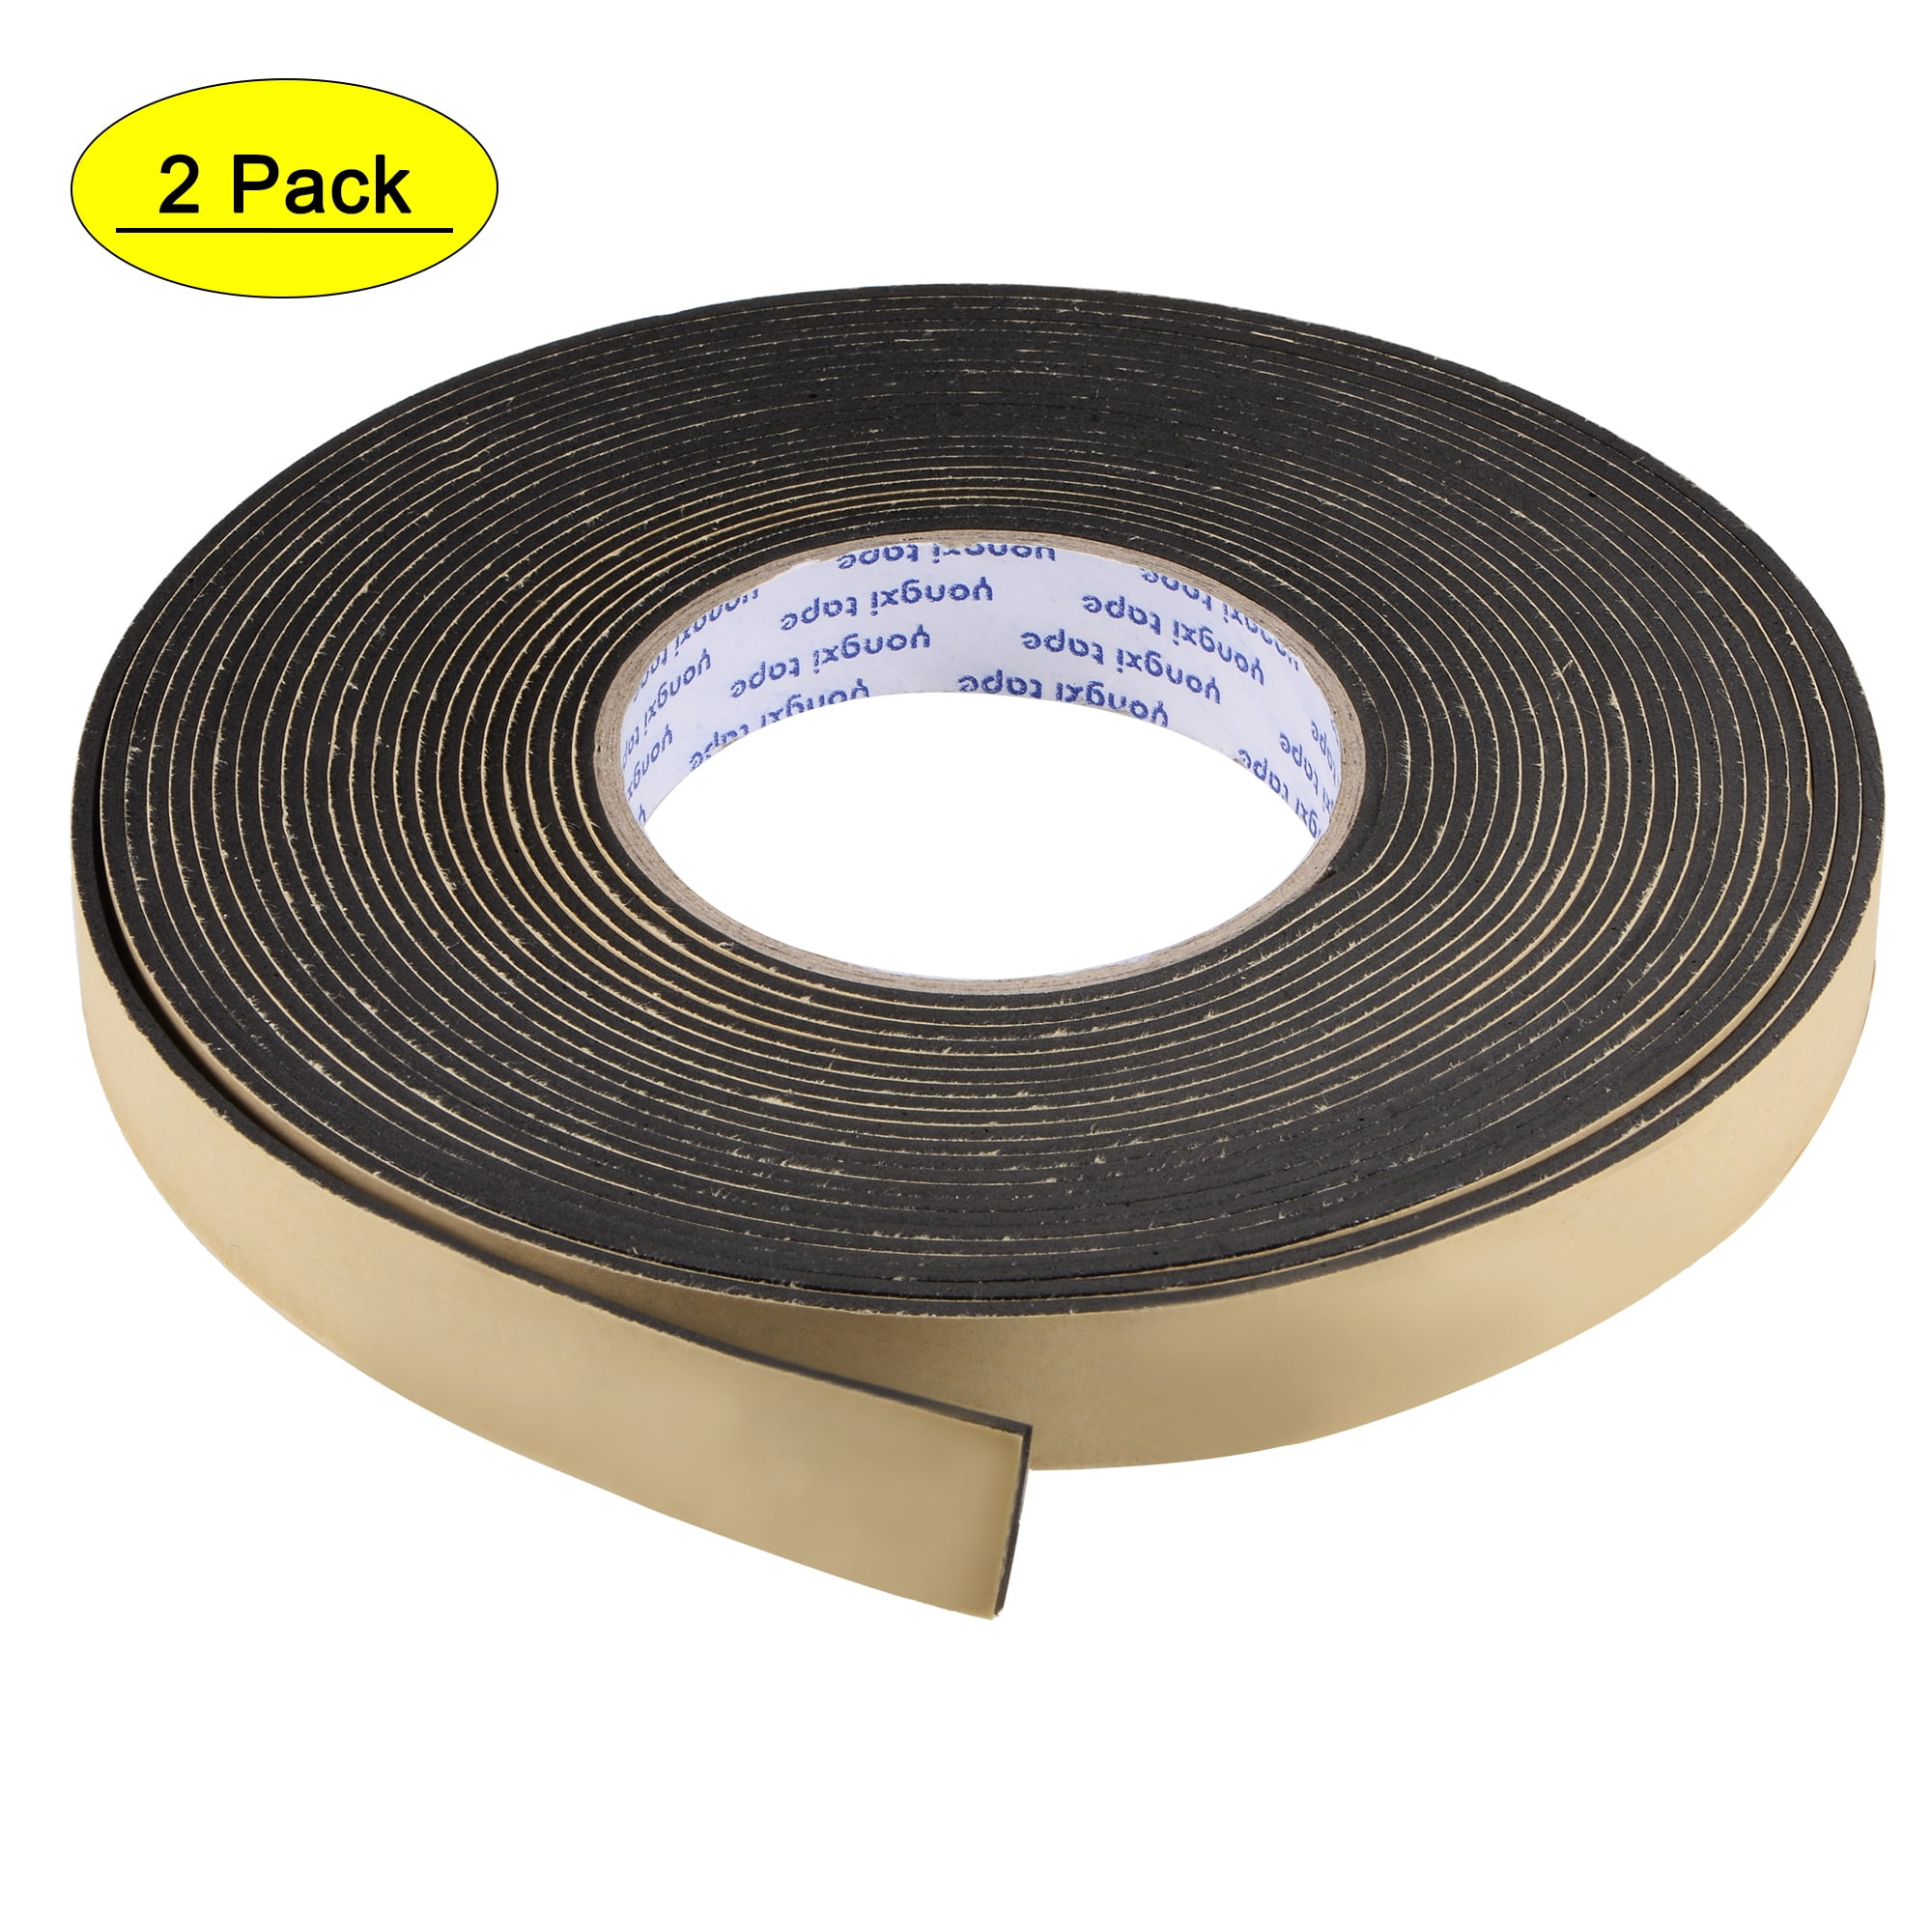 BRAND NEW Free Postage 10m Roll Foam Tape for Sealing Insulation 